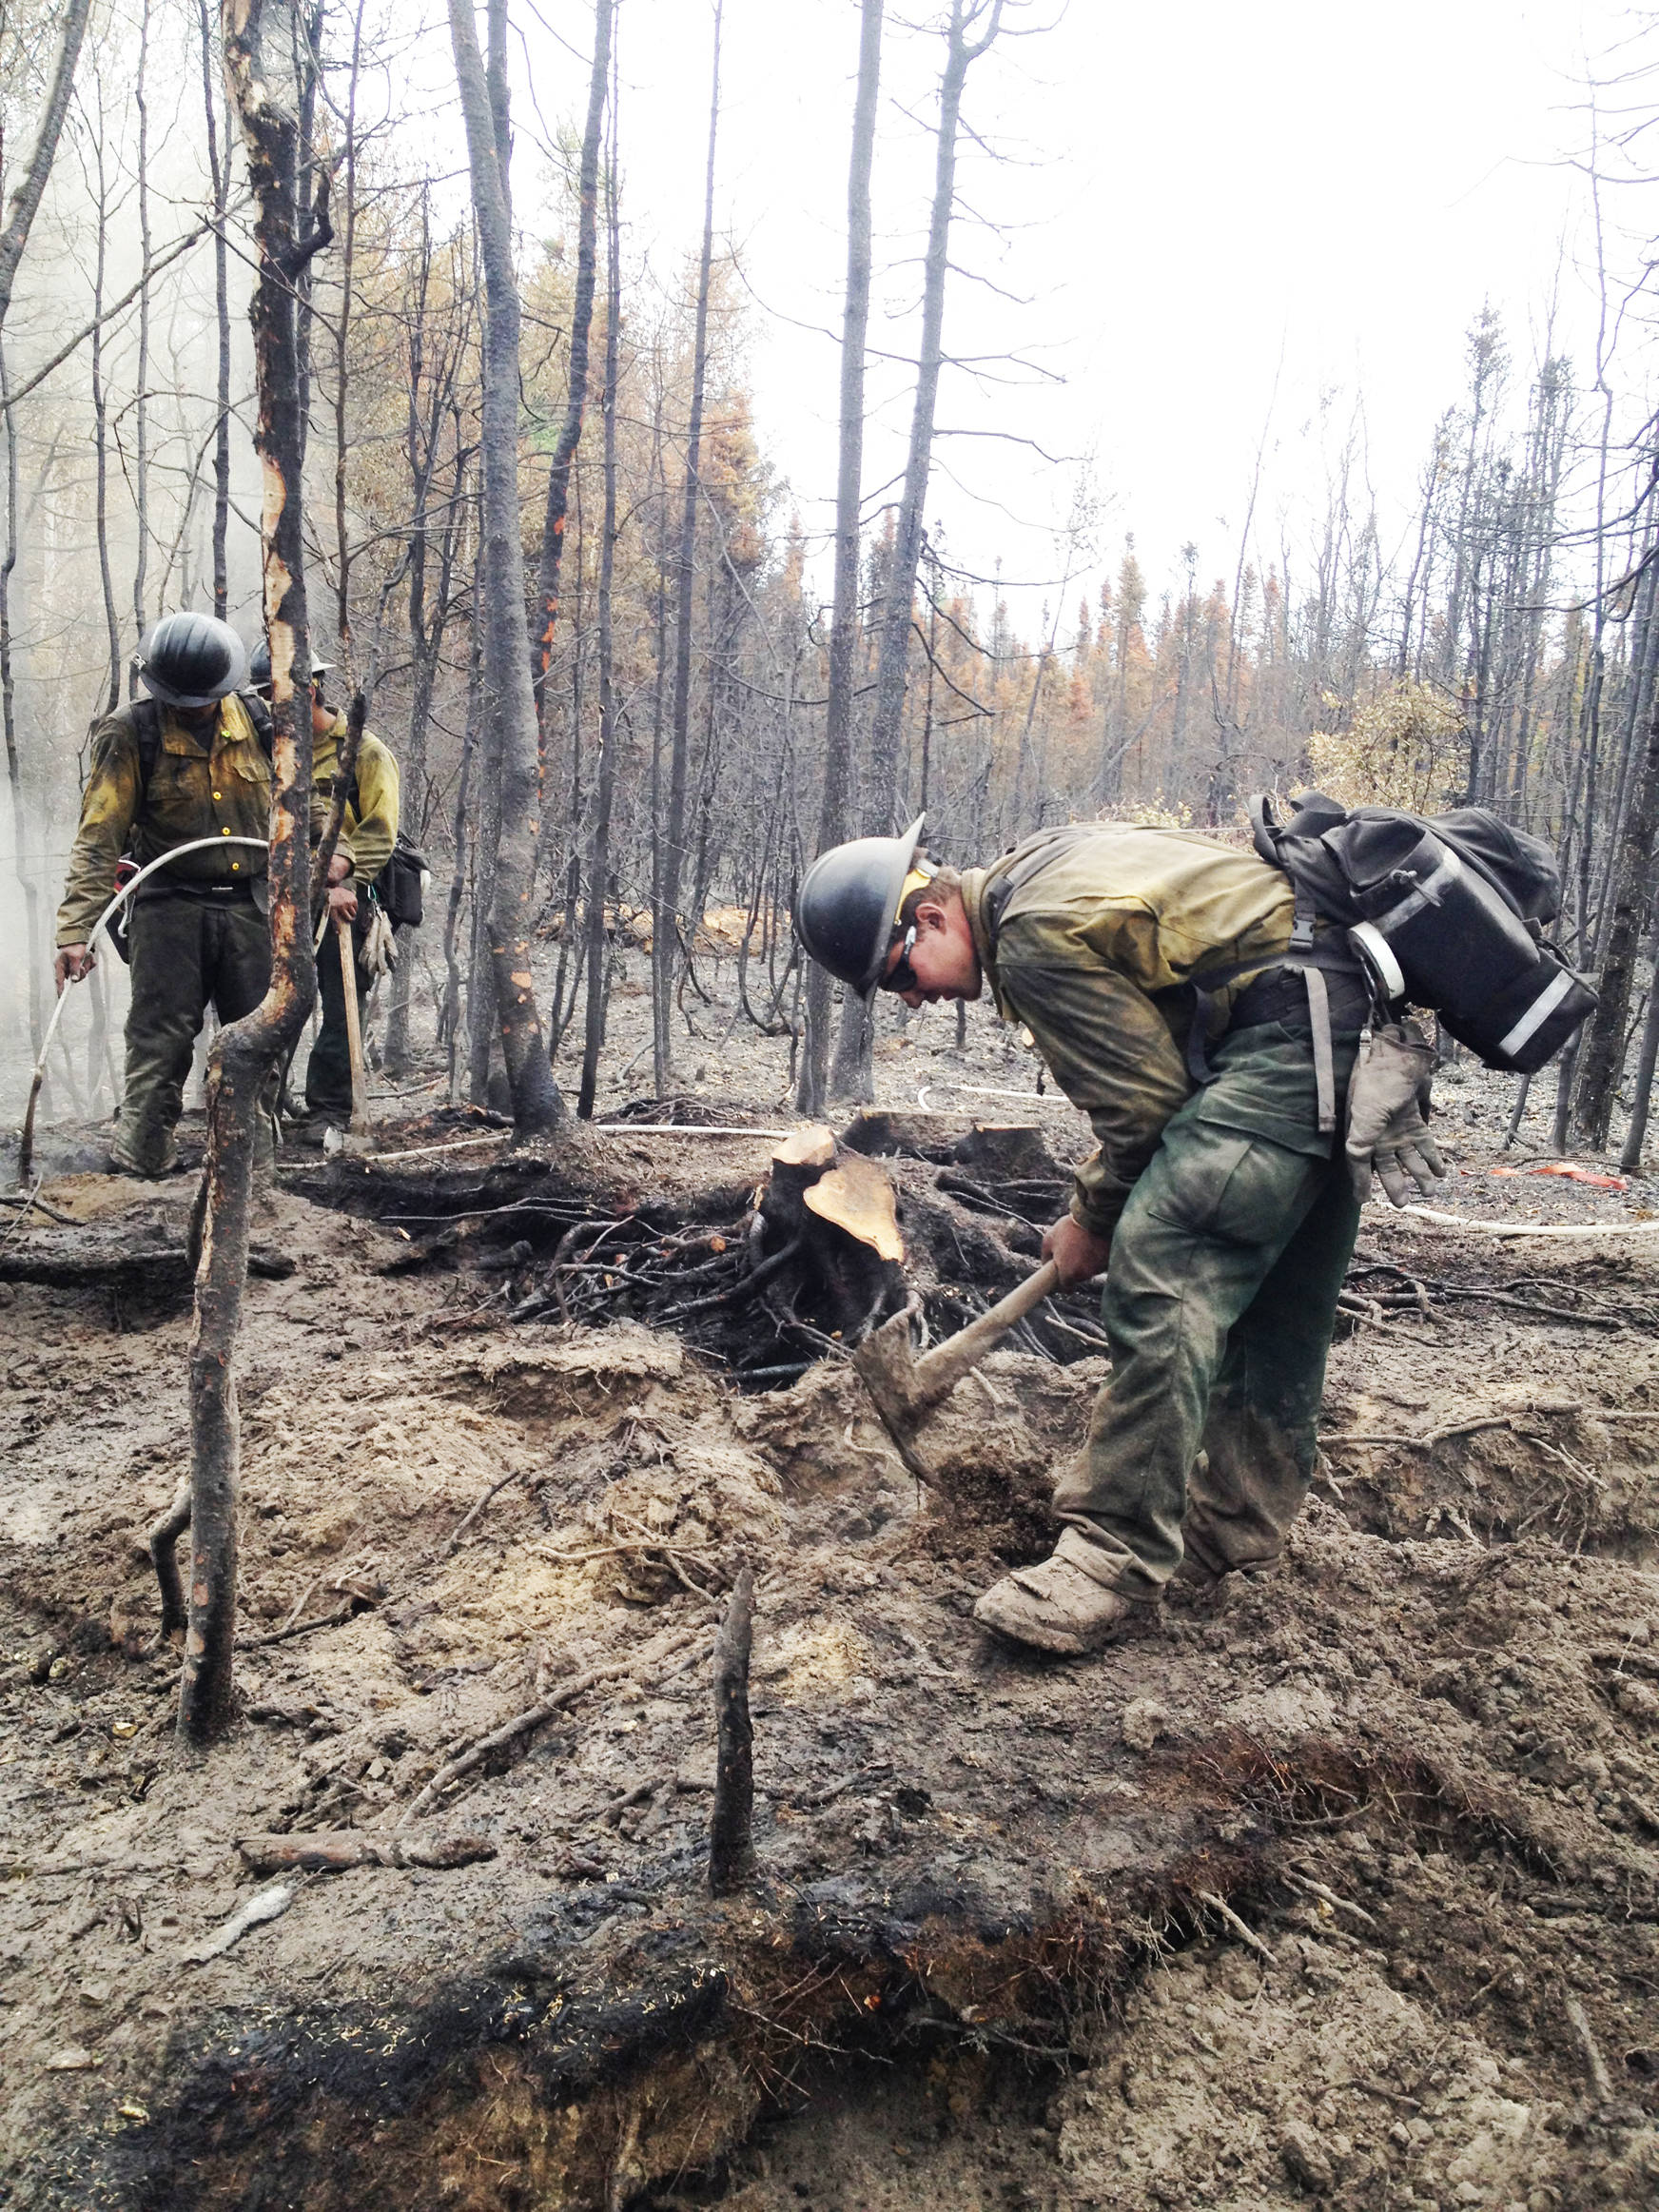 Members of the Yukon Fire Crew, highly trained hotshot wildland firefighters, perform mop up work on the Kenai Peninsula in 2015. The Type 2 Hand Crew is based on the peninsula for a large part of the year in trailers parked on land leased to the nonprofit Chugachmiut, Inc. by the Kenai Peninsula Borough. Chugachmiut is seeking a grant that would allow the organization to build a permanent camp on land it bought in 2011. (Photo courtesy Nathan Lojewski)